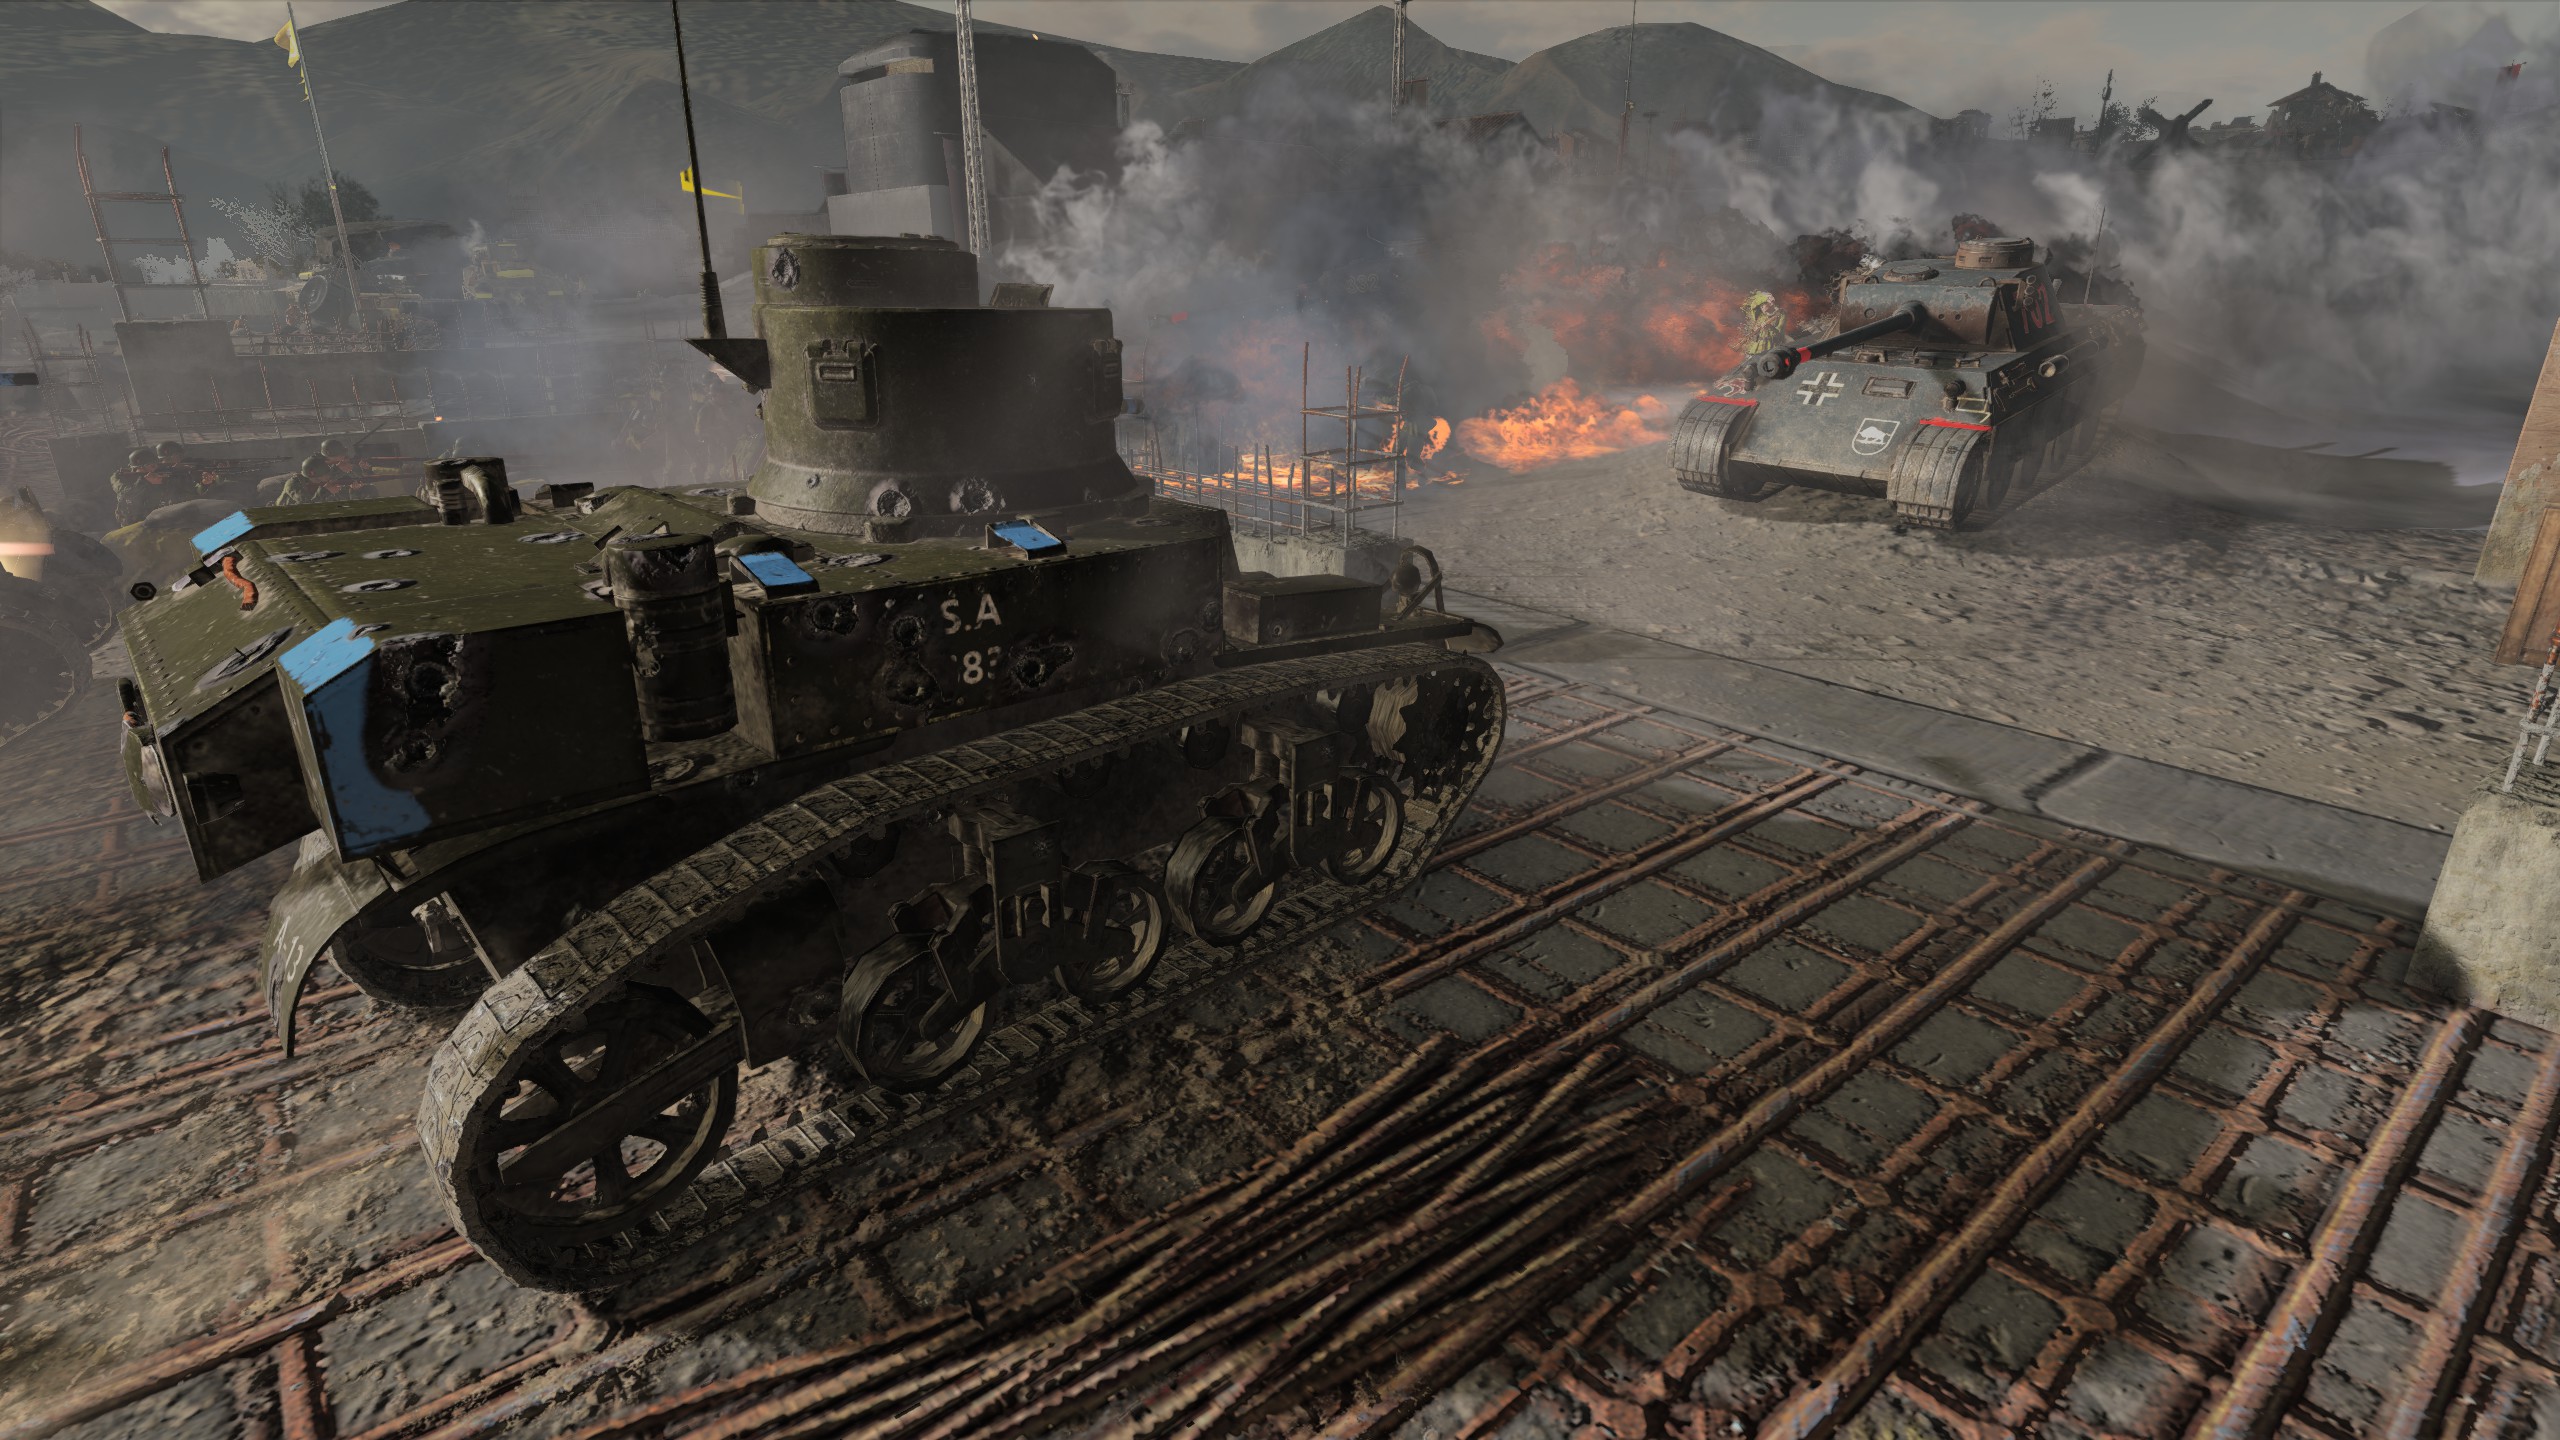 Company of Heroes 3 tanks fighting